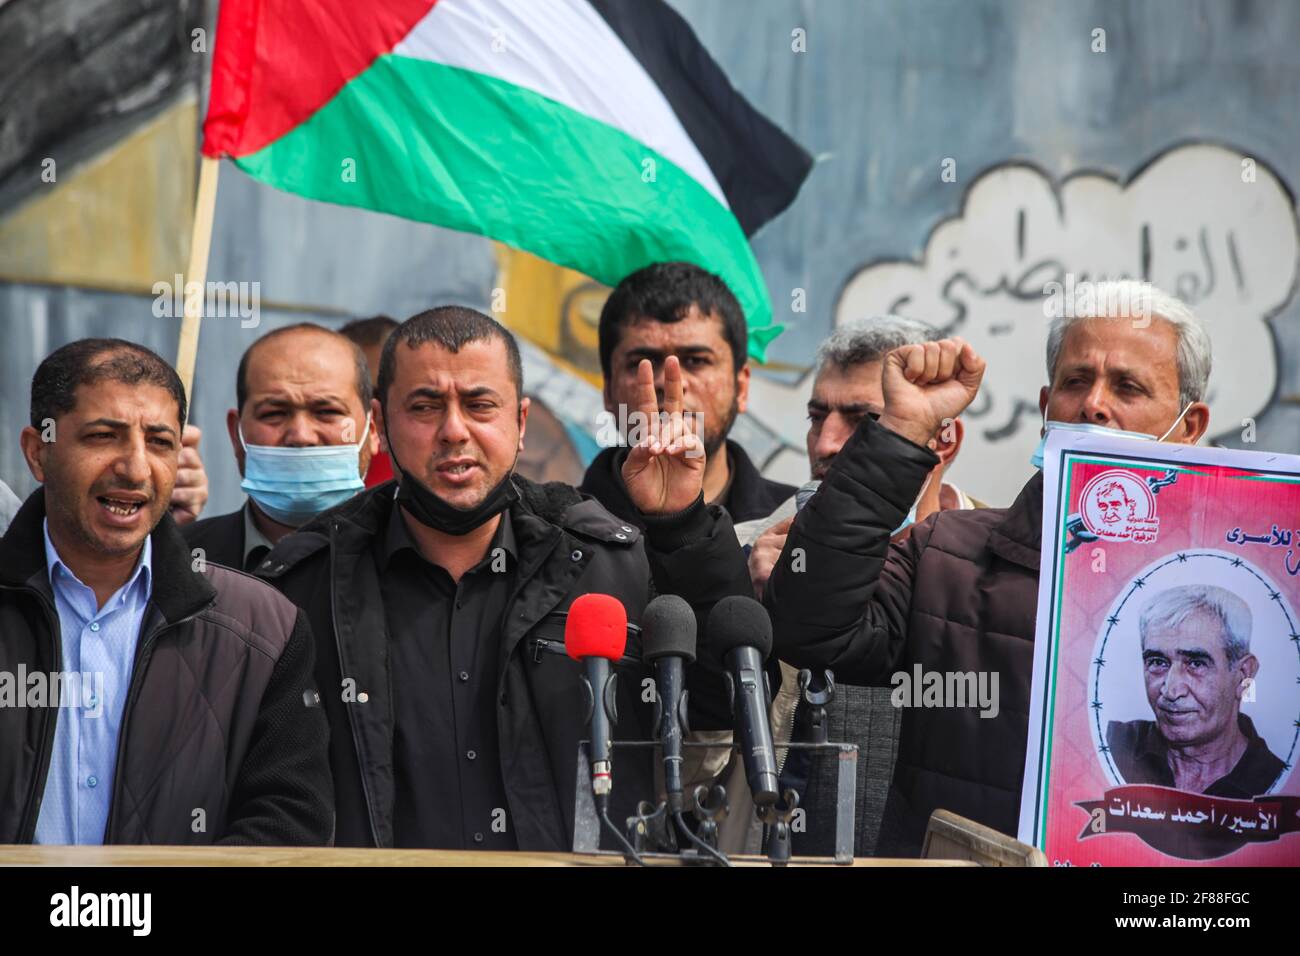 Palestinians take part in a protest to solidarity prisoners in Israeli jails on Palestinian Prisoners' Day, in front of Erez crossing, in Beit Hanoun in the northern Gaza Strip, Palestine, on April 12, 2021. Ramez Habboub/ABACAPRESS.COM Stock Photo